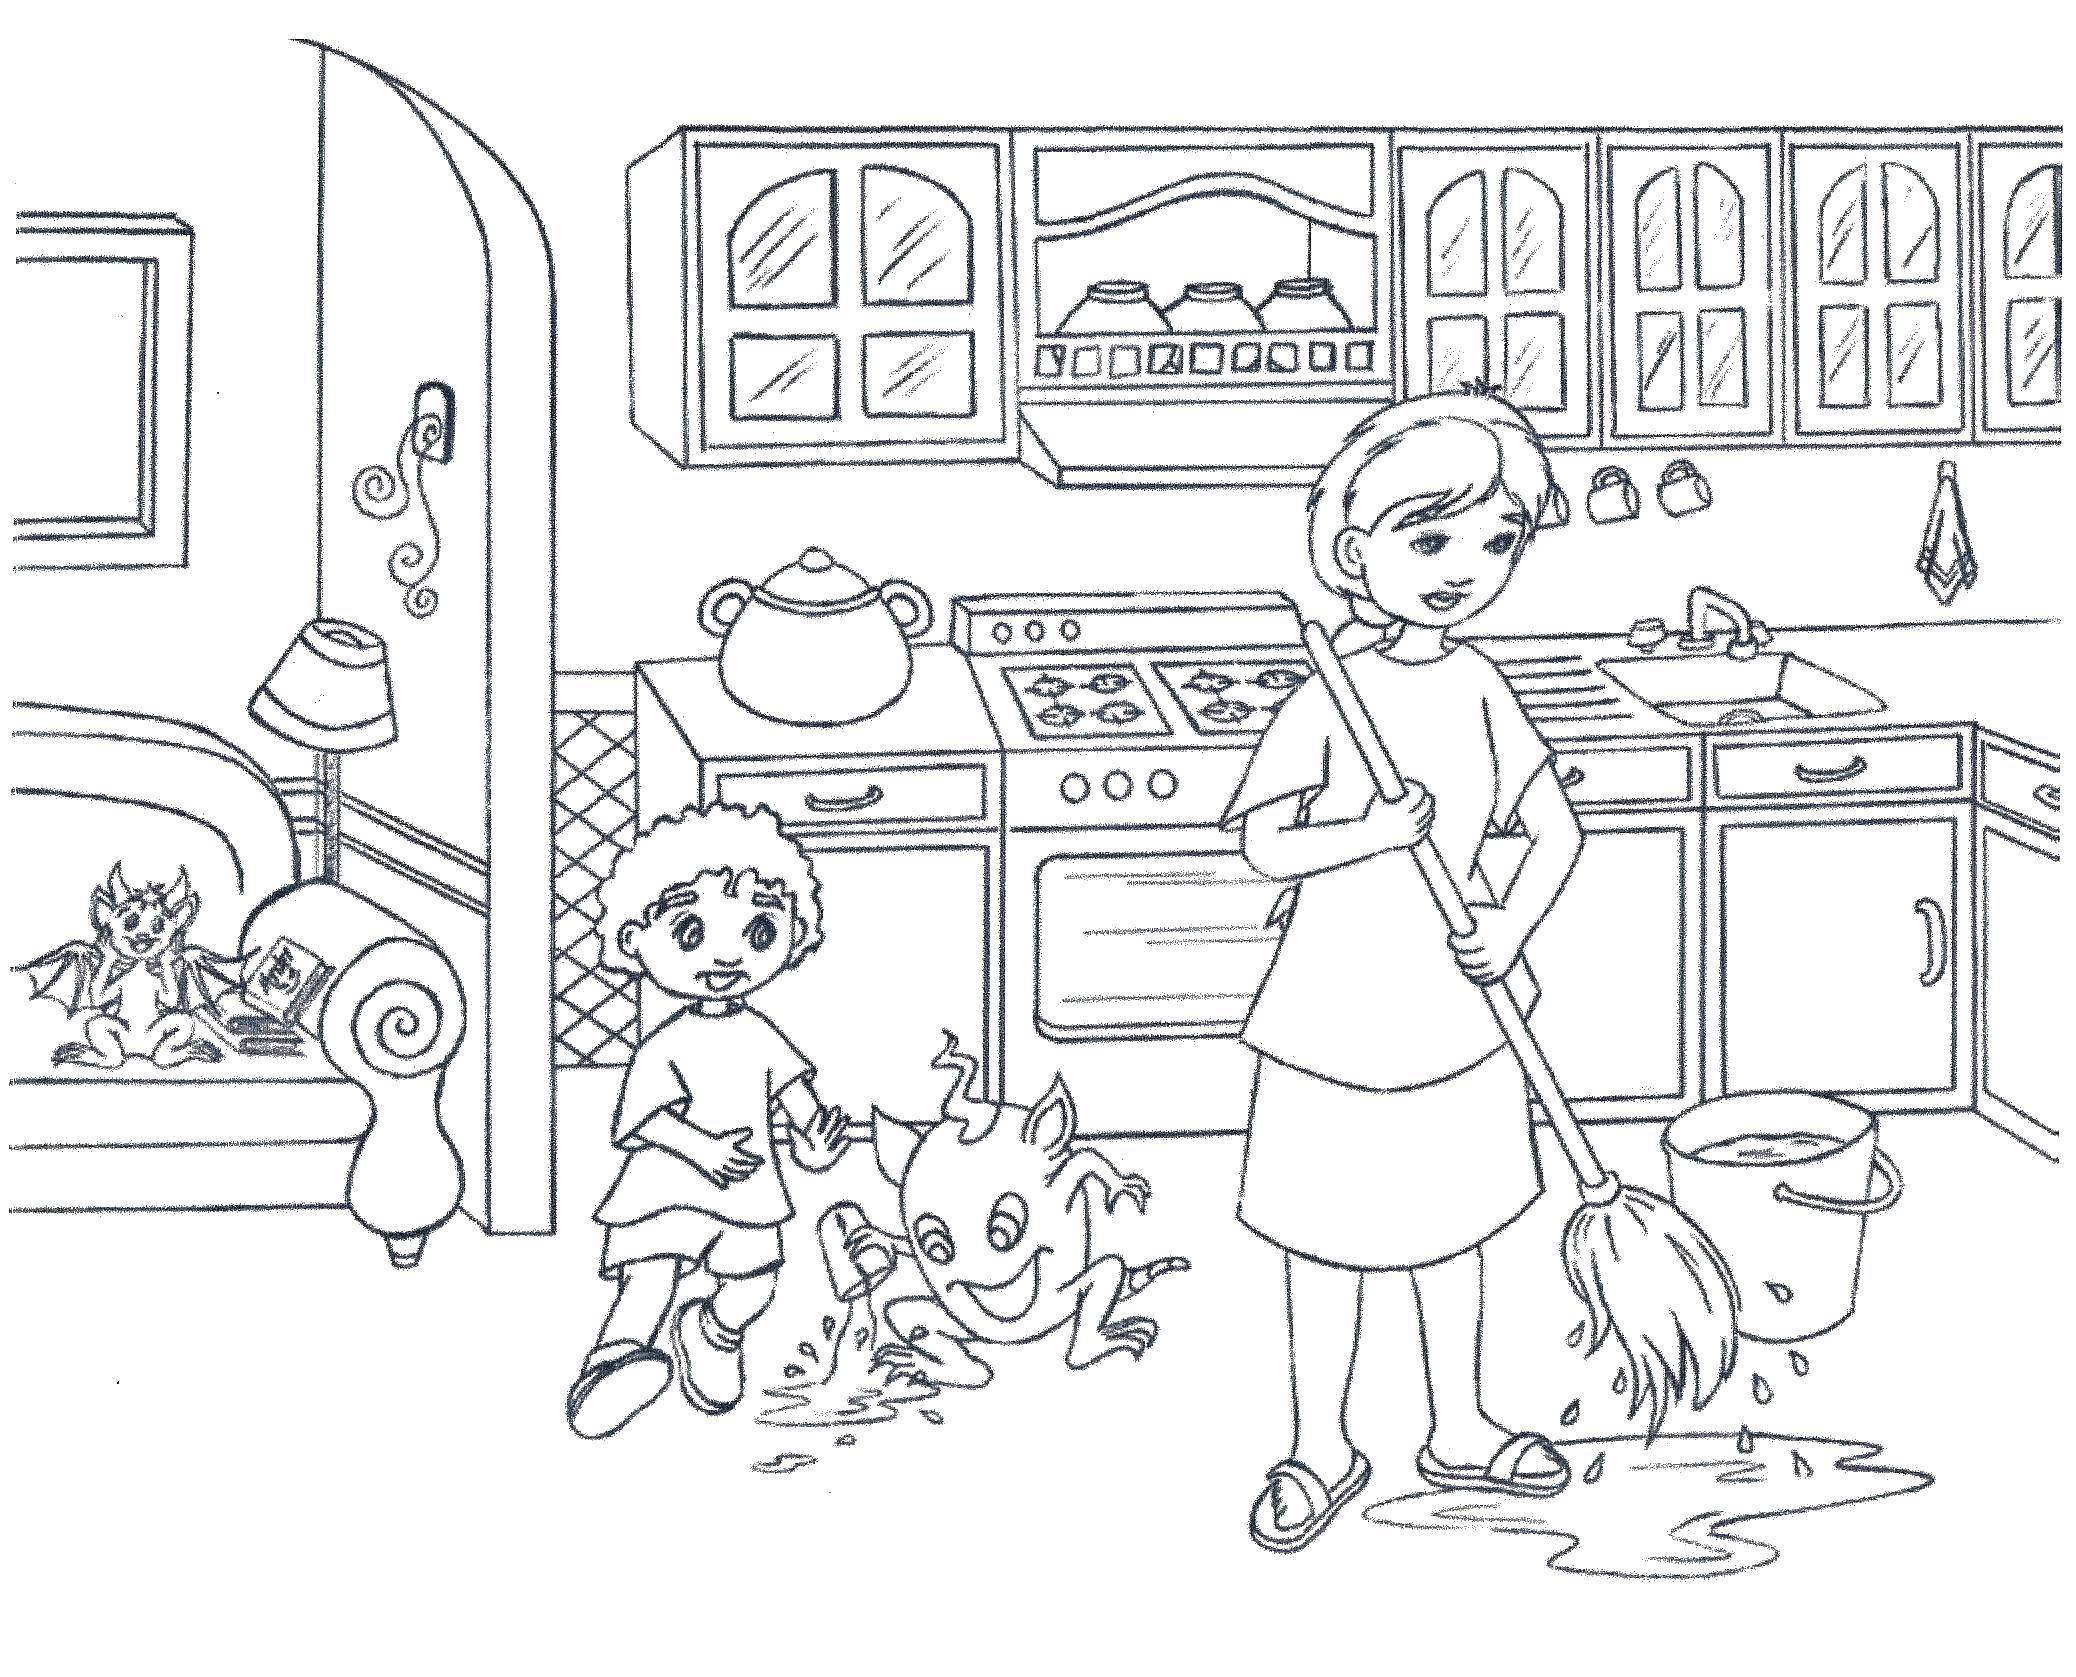 Coloring She cleans the kitchen. Category Kitchen. Tags:  kitchen, girl, broom.